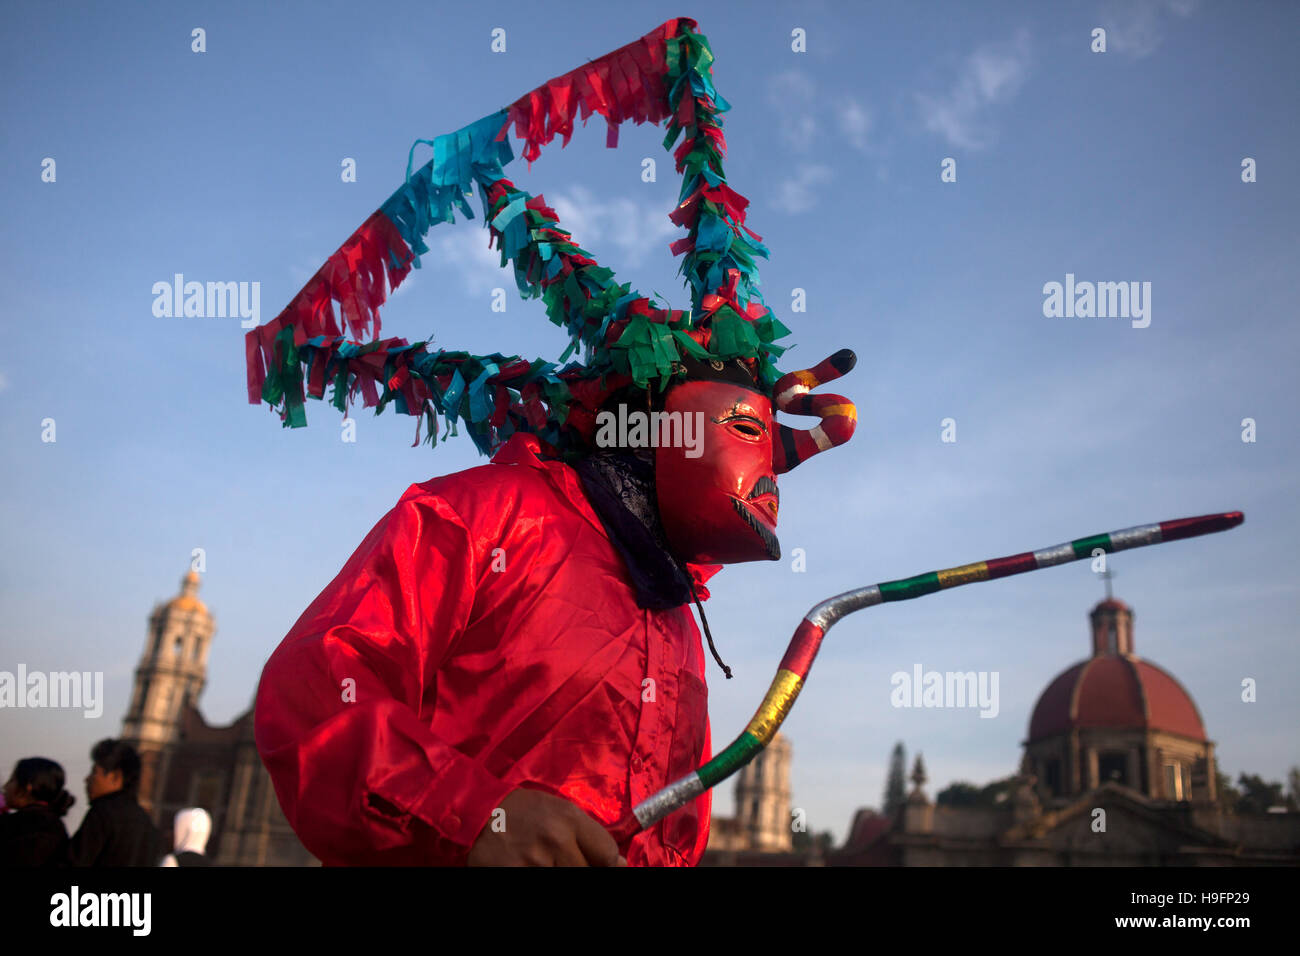 Dancers from El Palmar, Puebla, perform Saint James' dance during the annual pilgrimage to the Basilica of Our Lady of Guadalupe Stock Photo